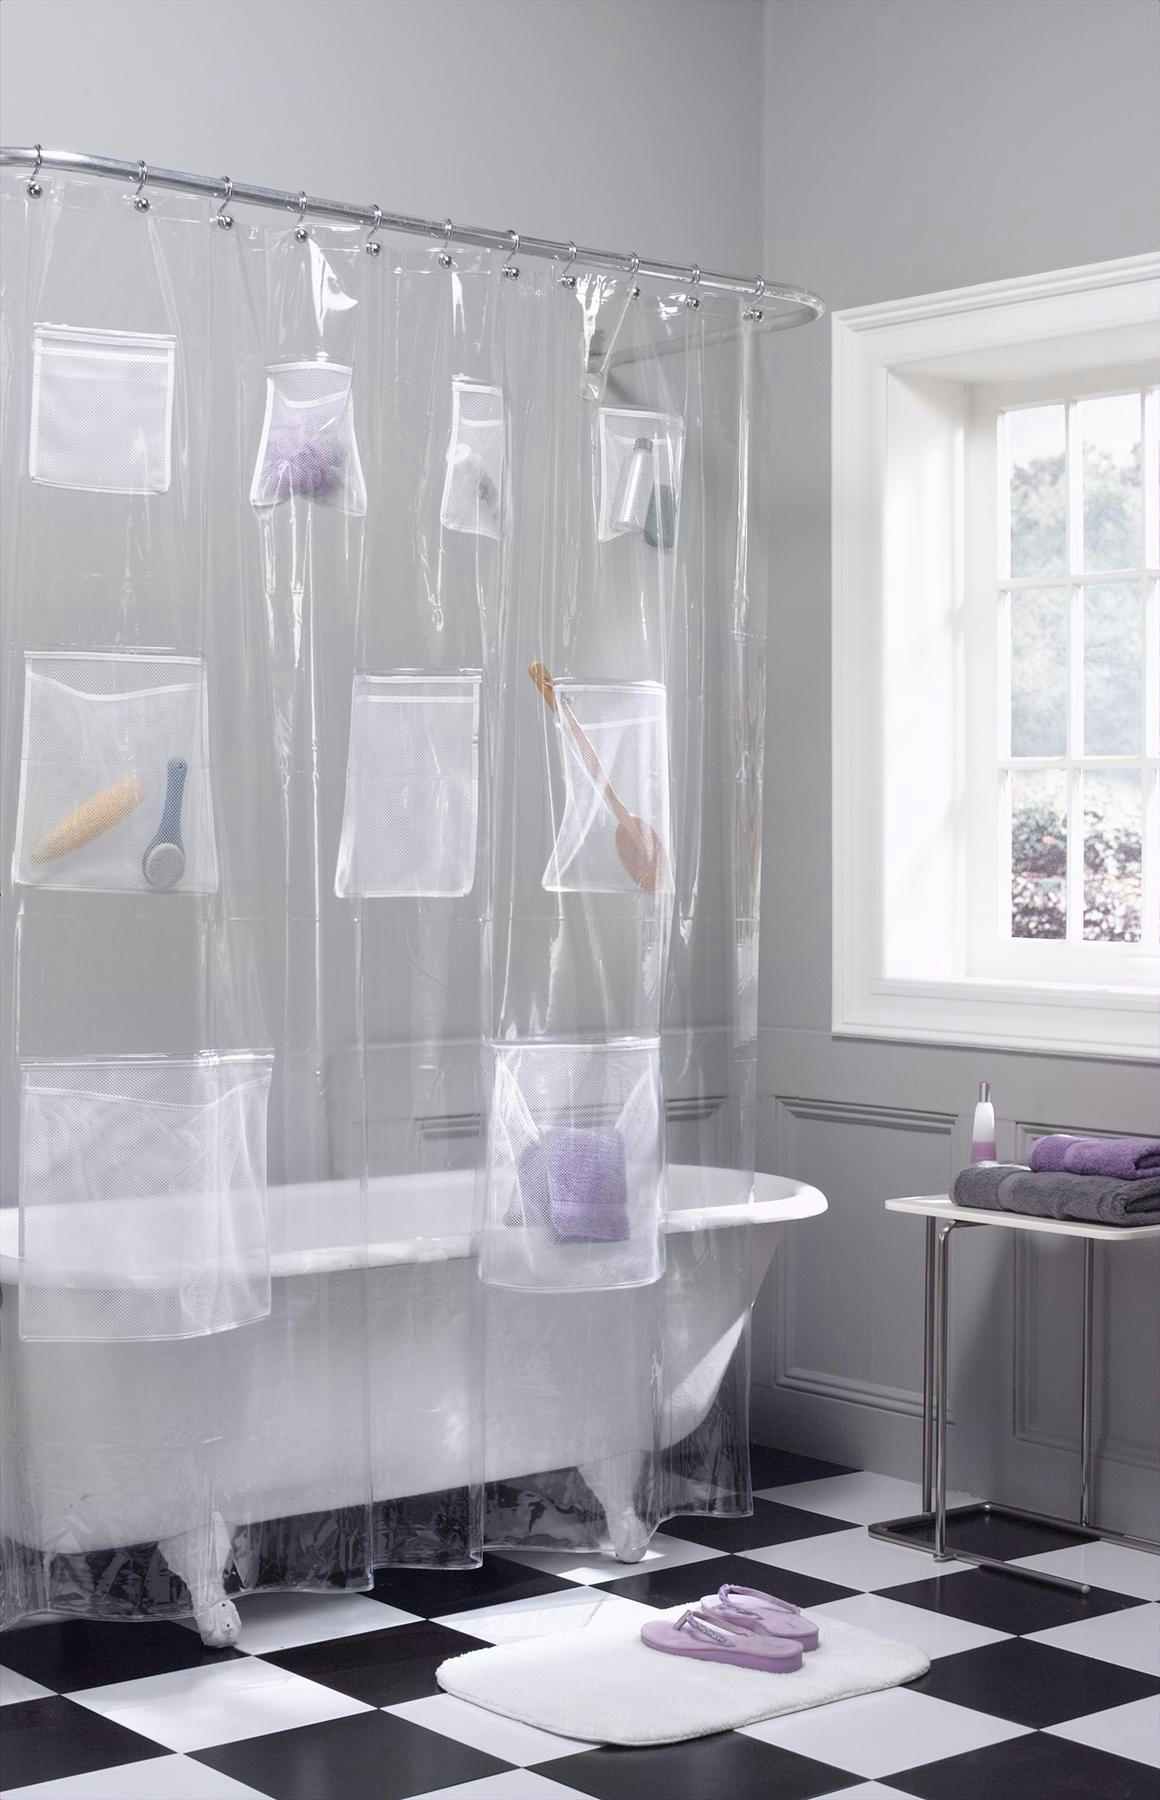 Hang a shower curtain with storage pockets.